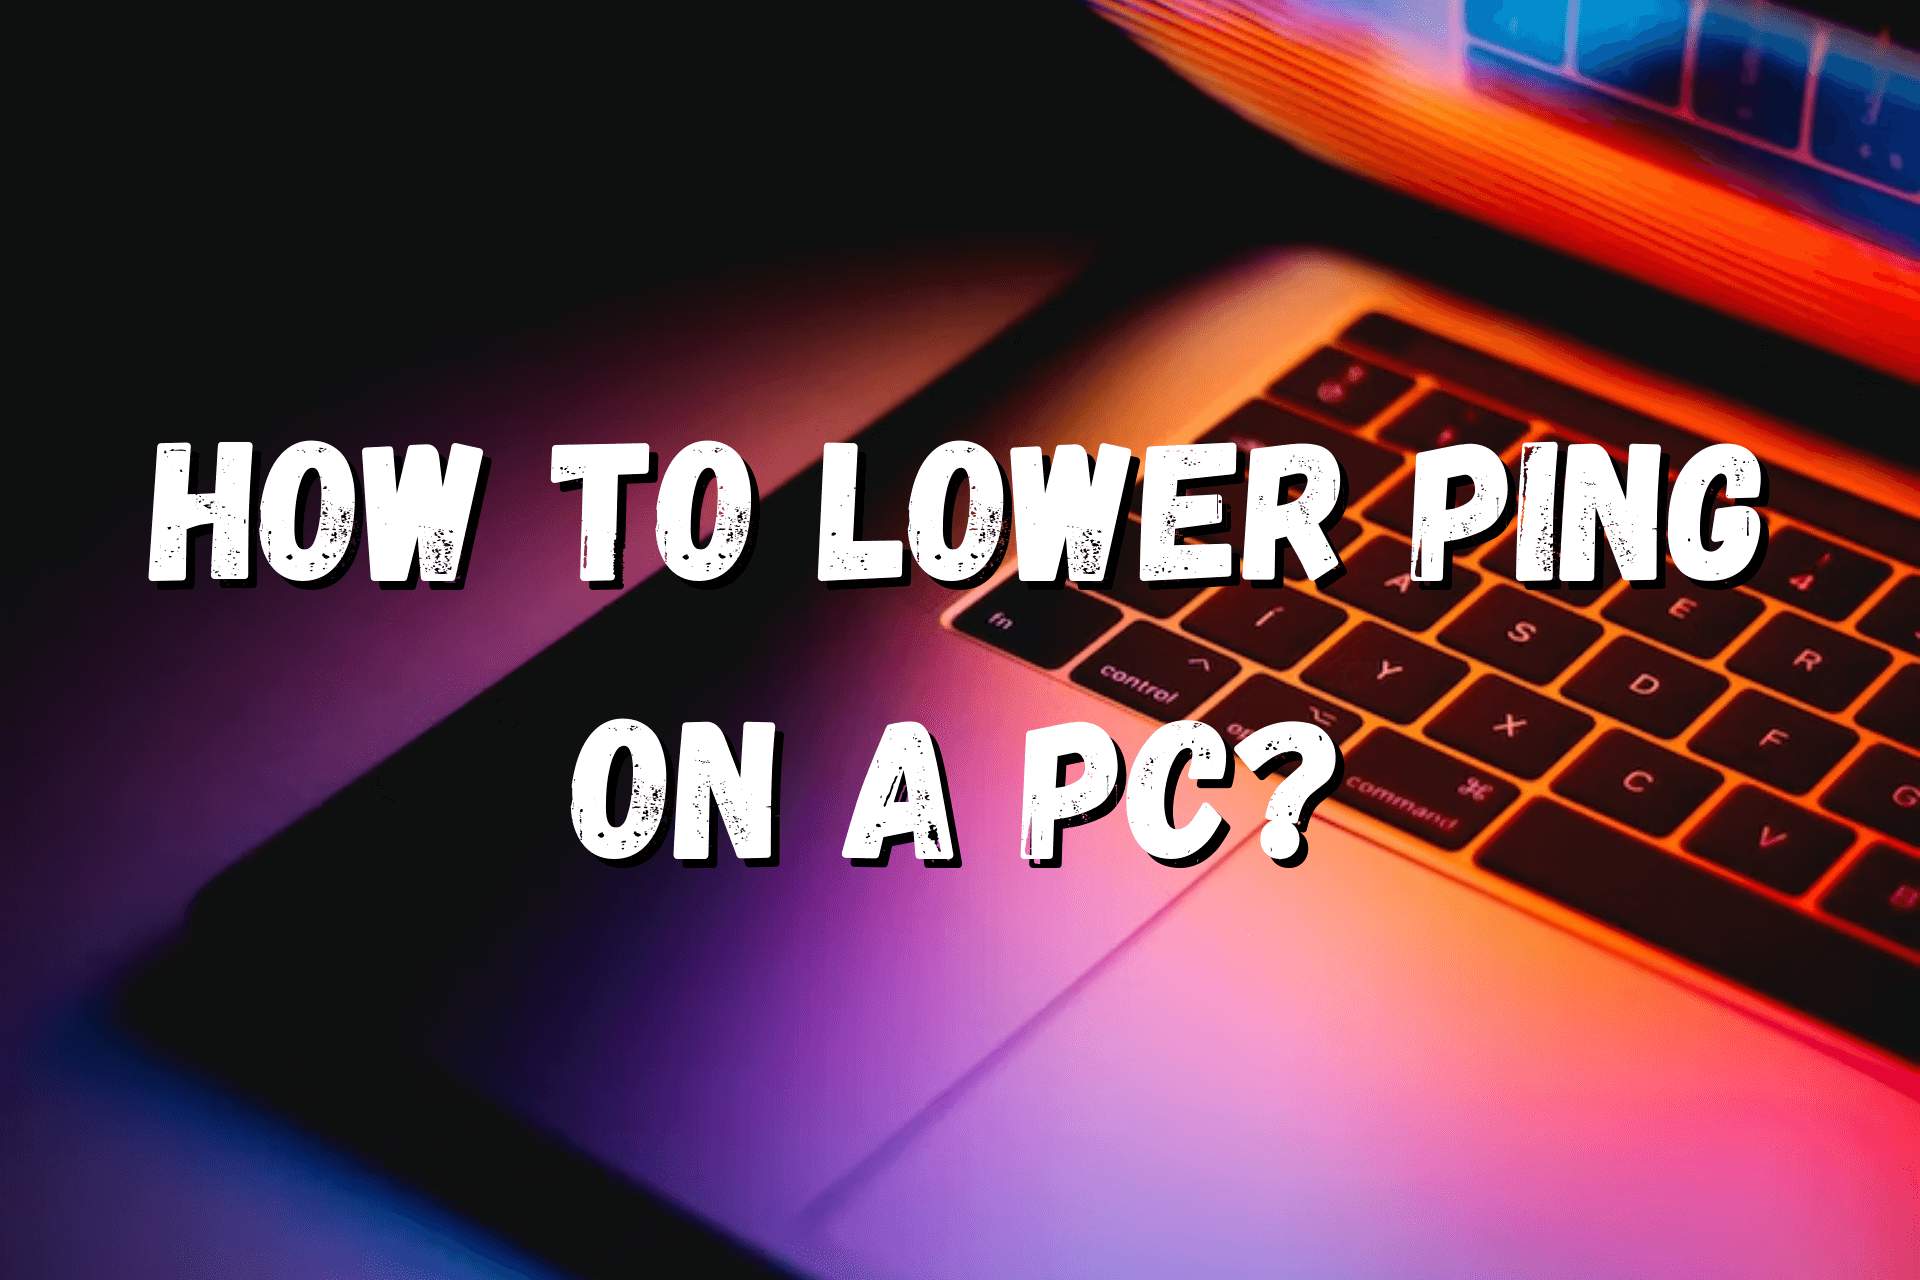 How to lower ping on PC